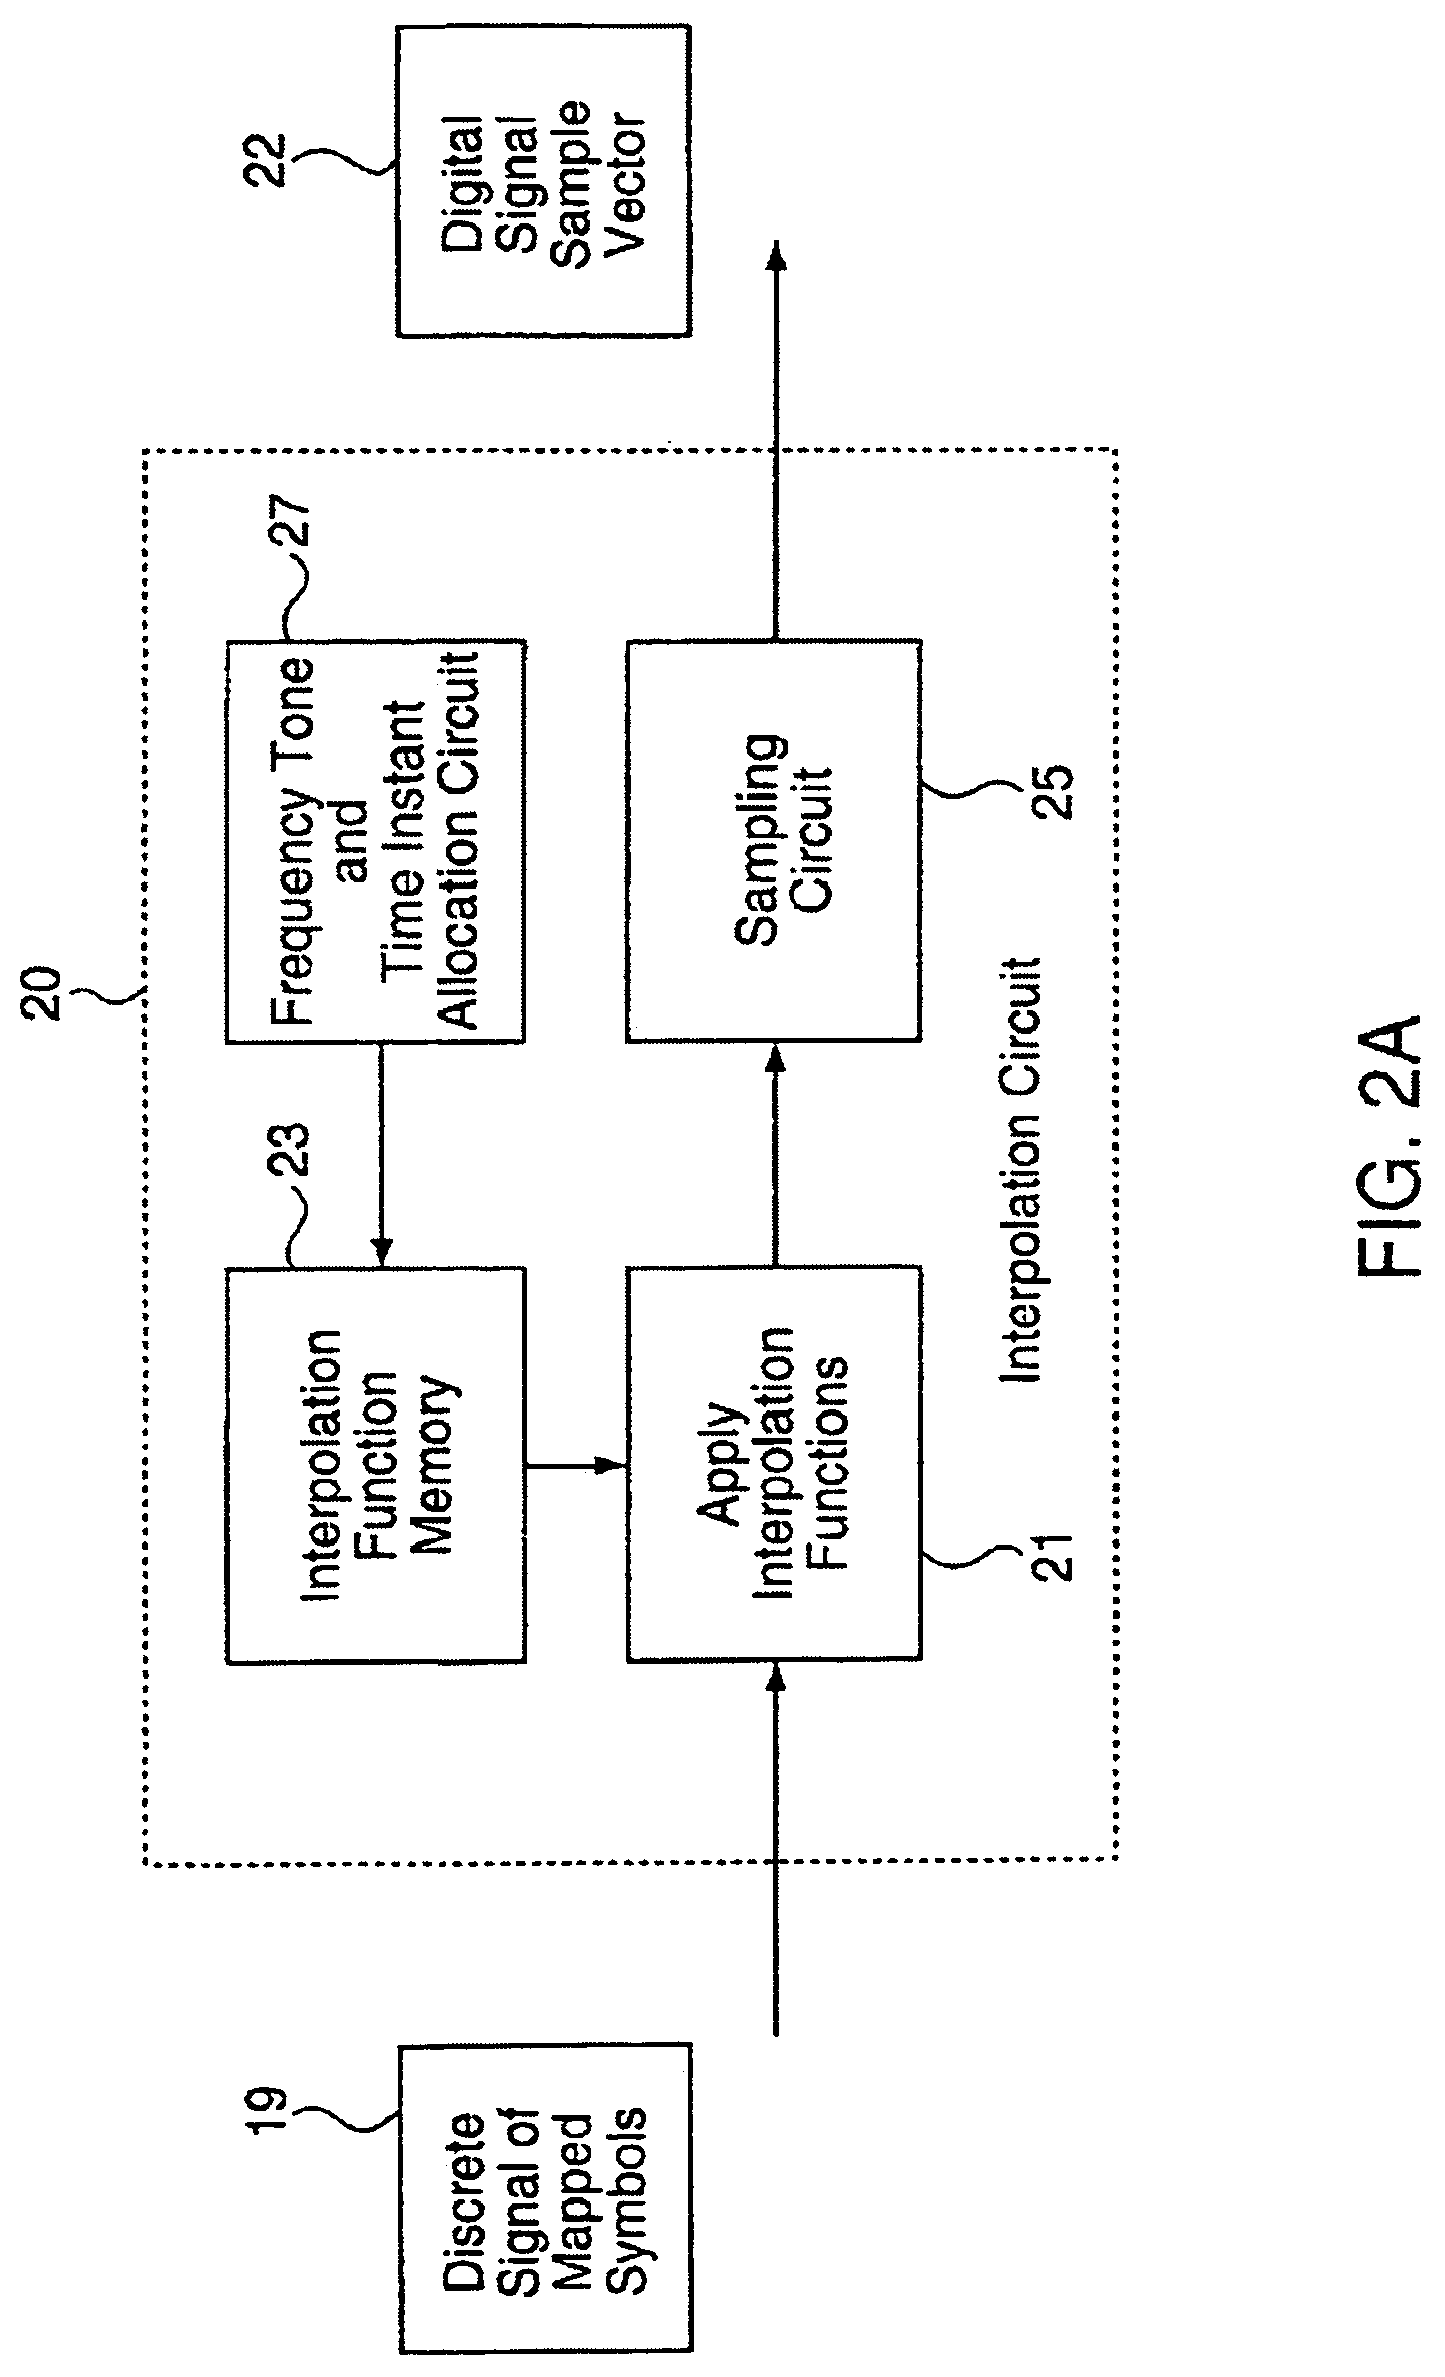 Signaling method in an OFDM multiple access system